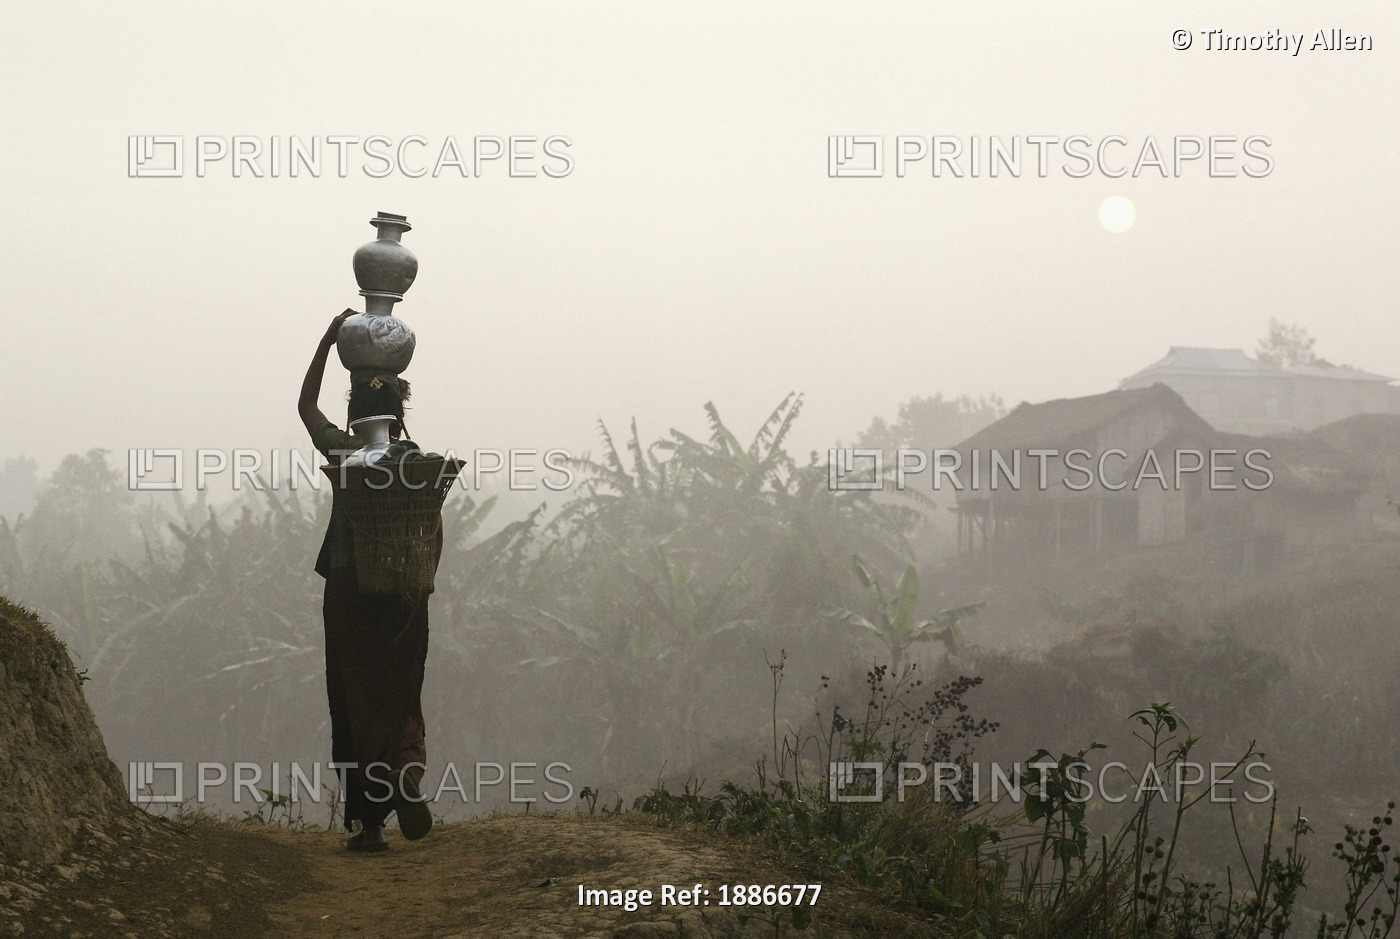 Bru Tribeswoman Carrying Water Pots On Her Head At Sunrise